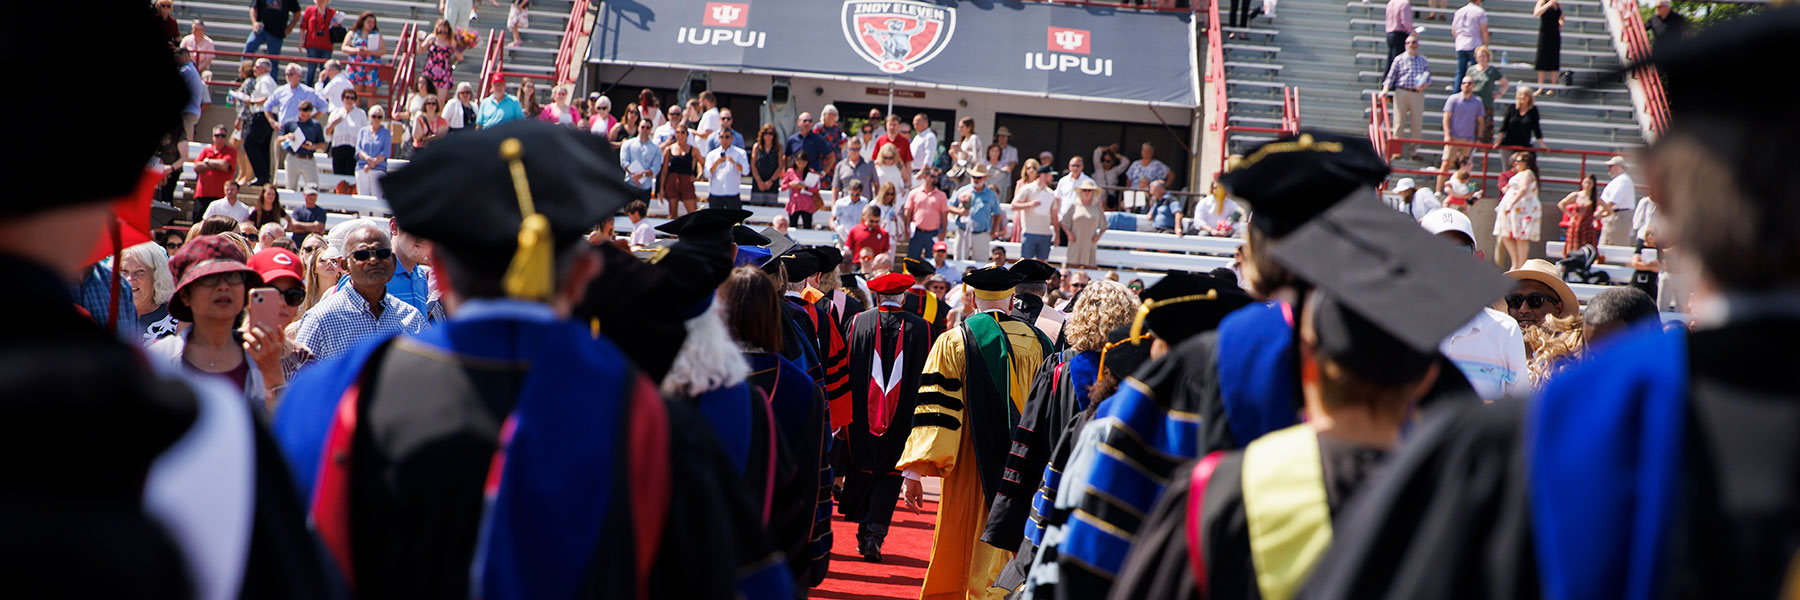 Graduating IUPUI students and faculty in graduation regalia form two lines in the pitch of Michael Carroll Stadium on campus for the 2022 commencement. Directly ahead of them is stadium seating with a crowd looking onward. Centered in the seating is a black canopy that says IUPUI and Indy Eleven